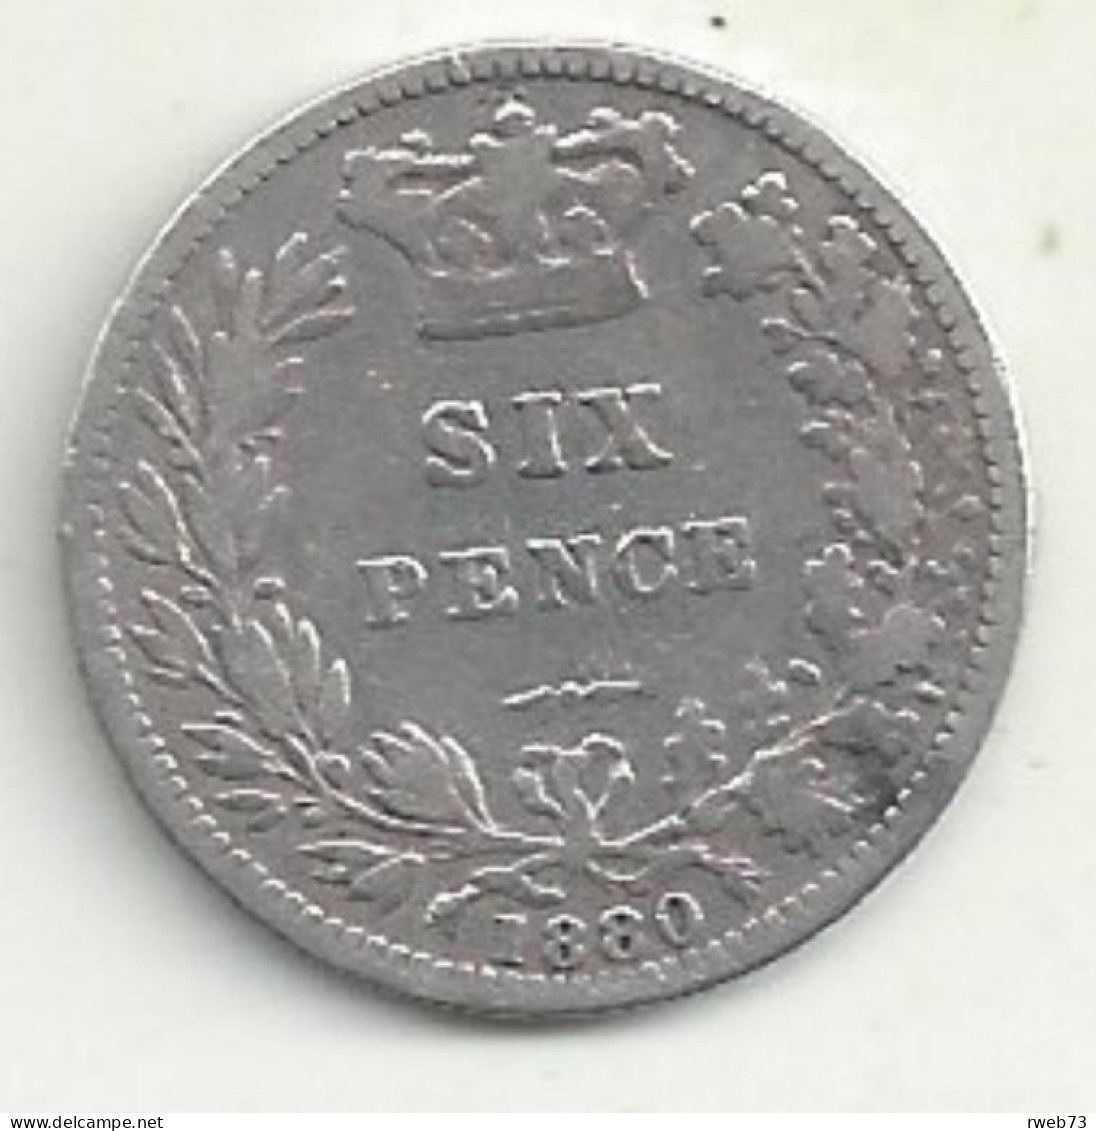 ANGLETERRE - 6 Pence - 1880 - Argent - B/TB - H. 6 Pence